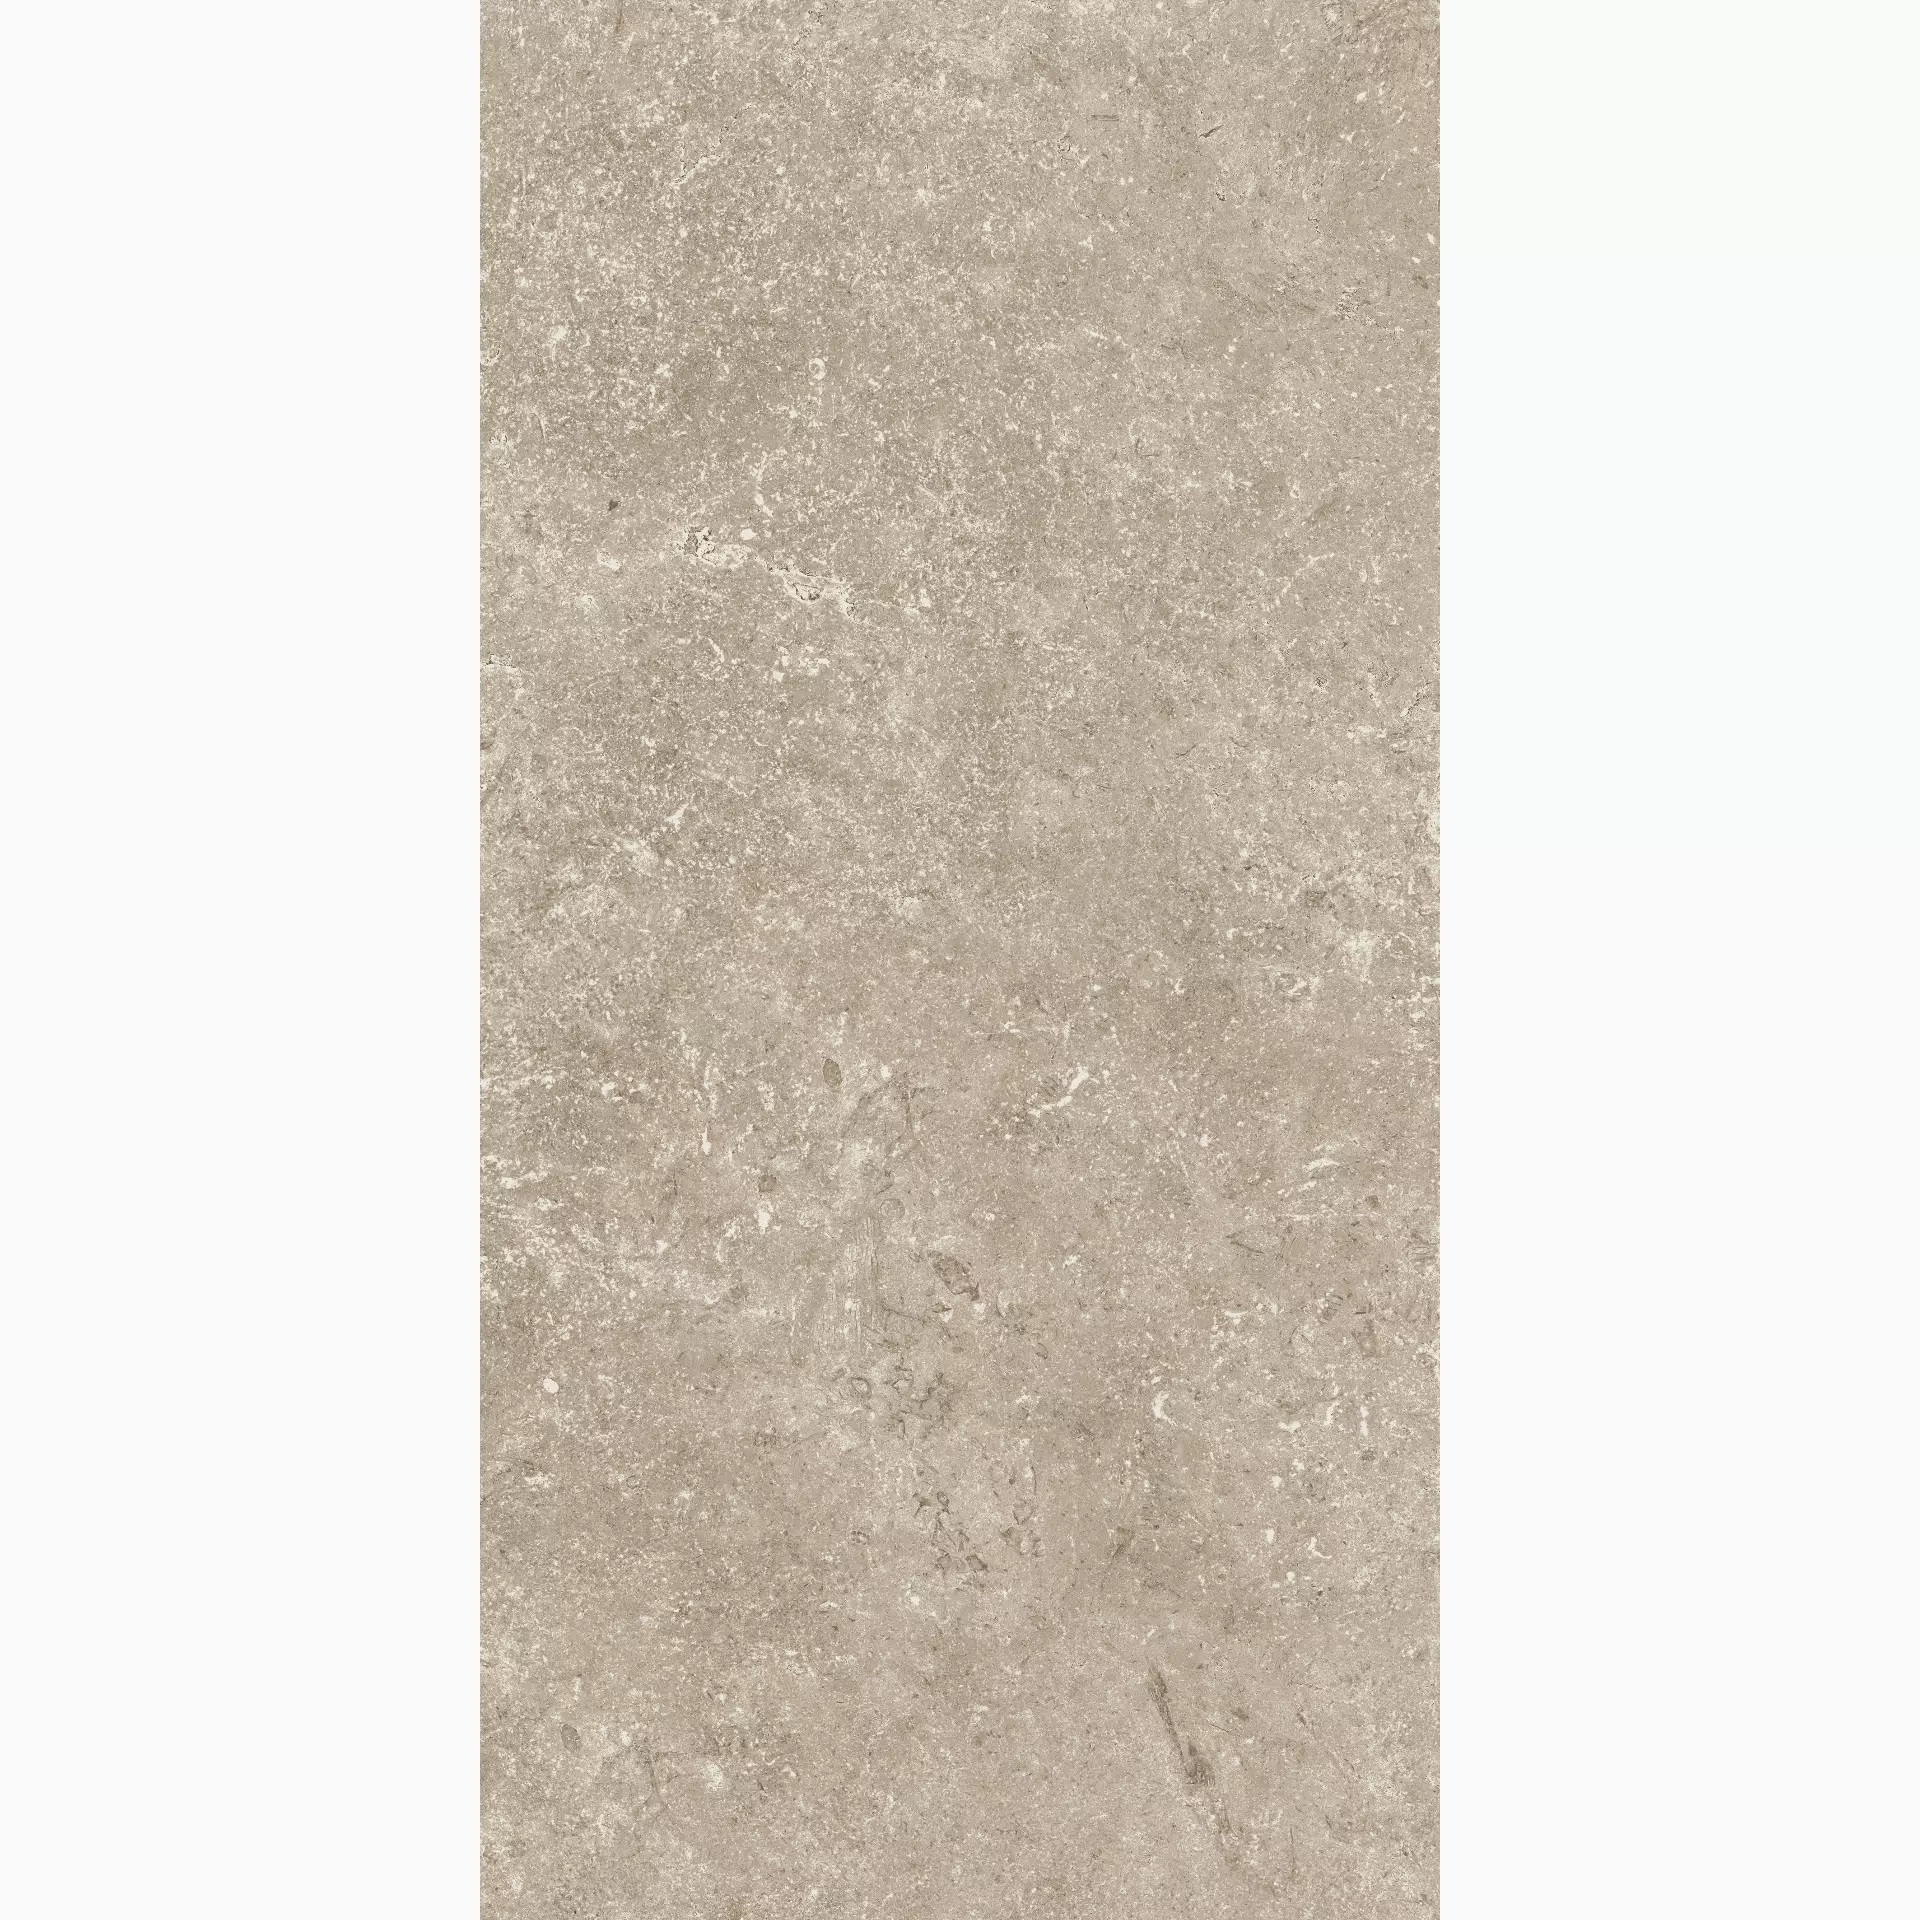 Cottodeste Secret Stone Shadow Grey Naturale Protect EG-SS30 30x60cm rectified 14mm